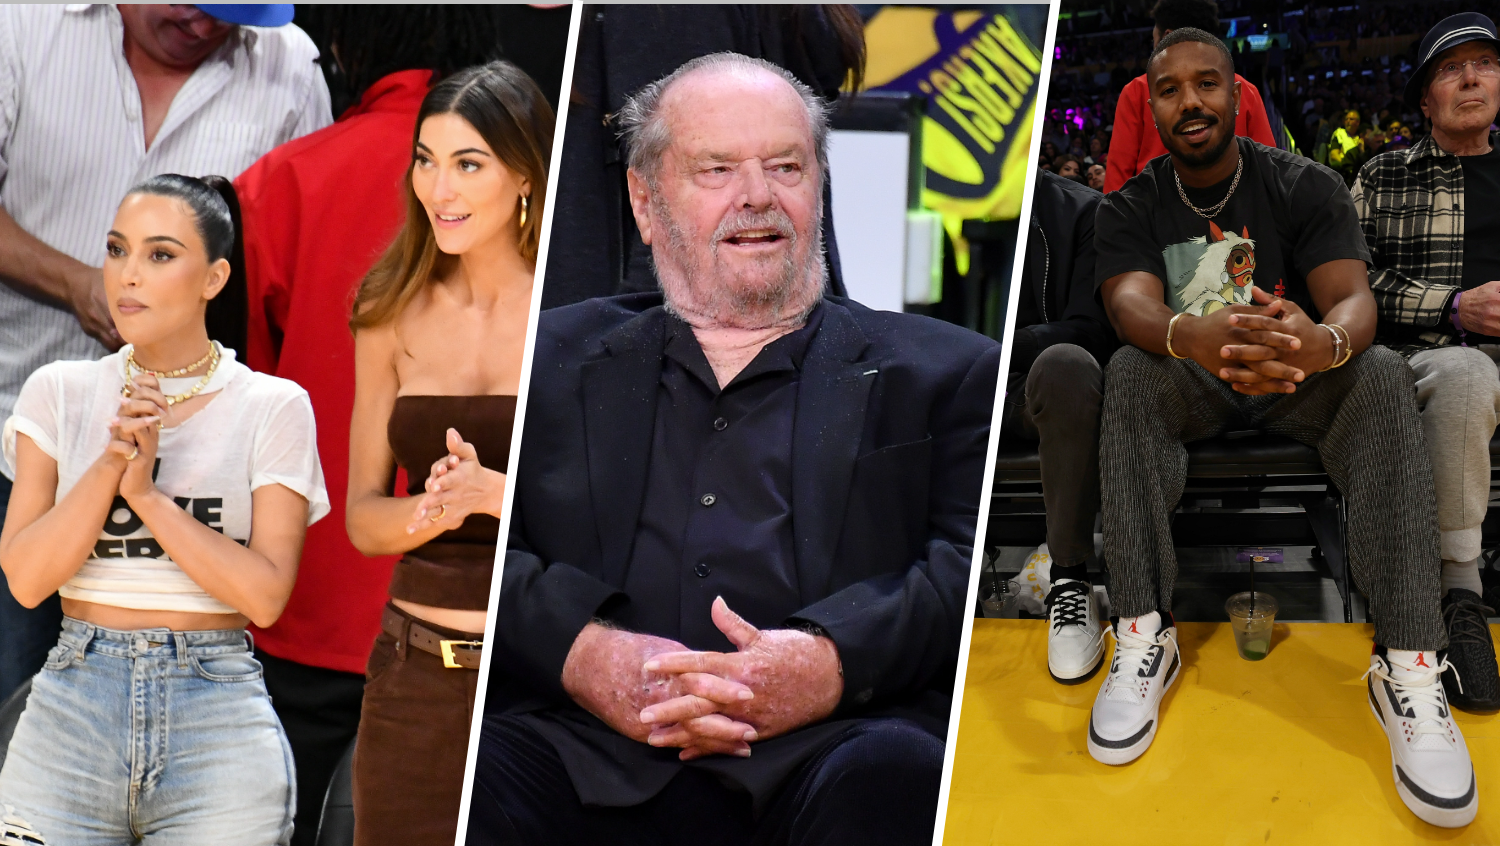 Celebs love the Lakers and Wear Wish too